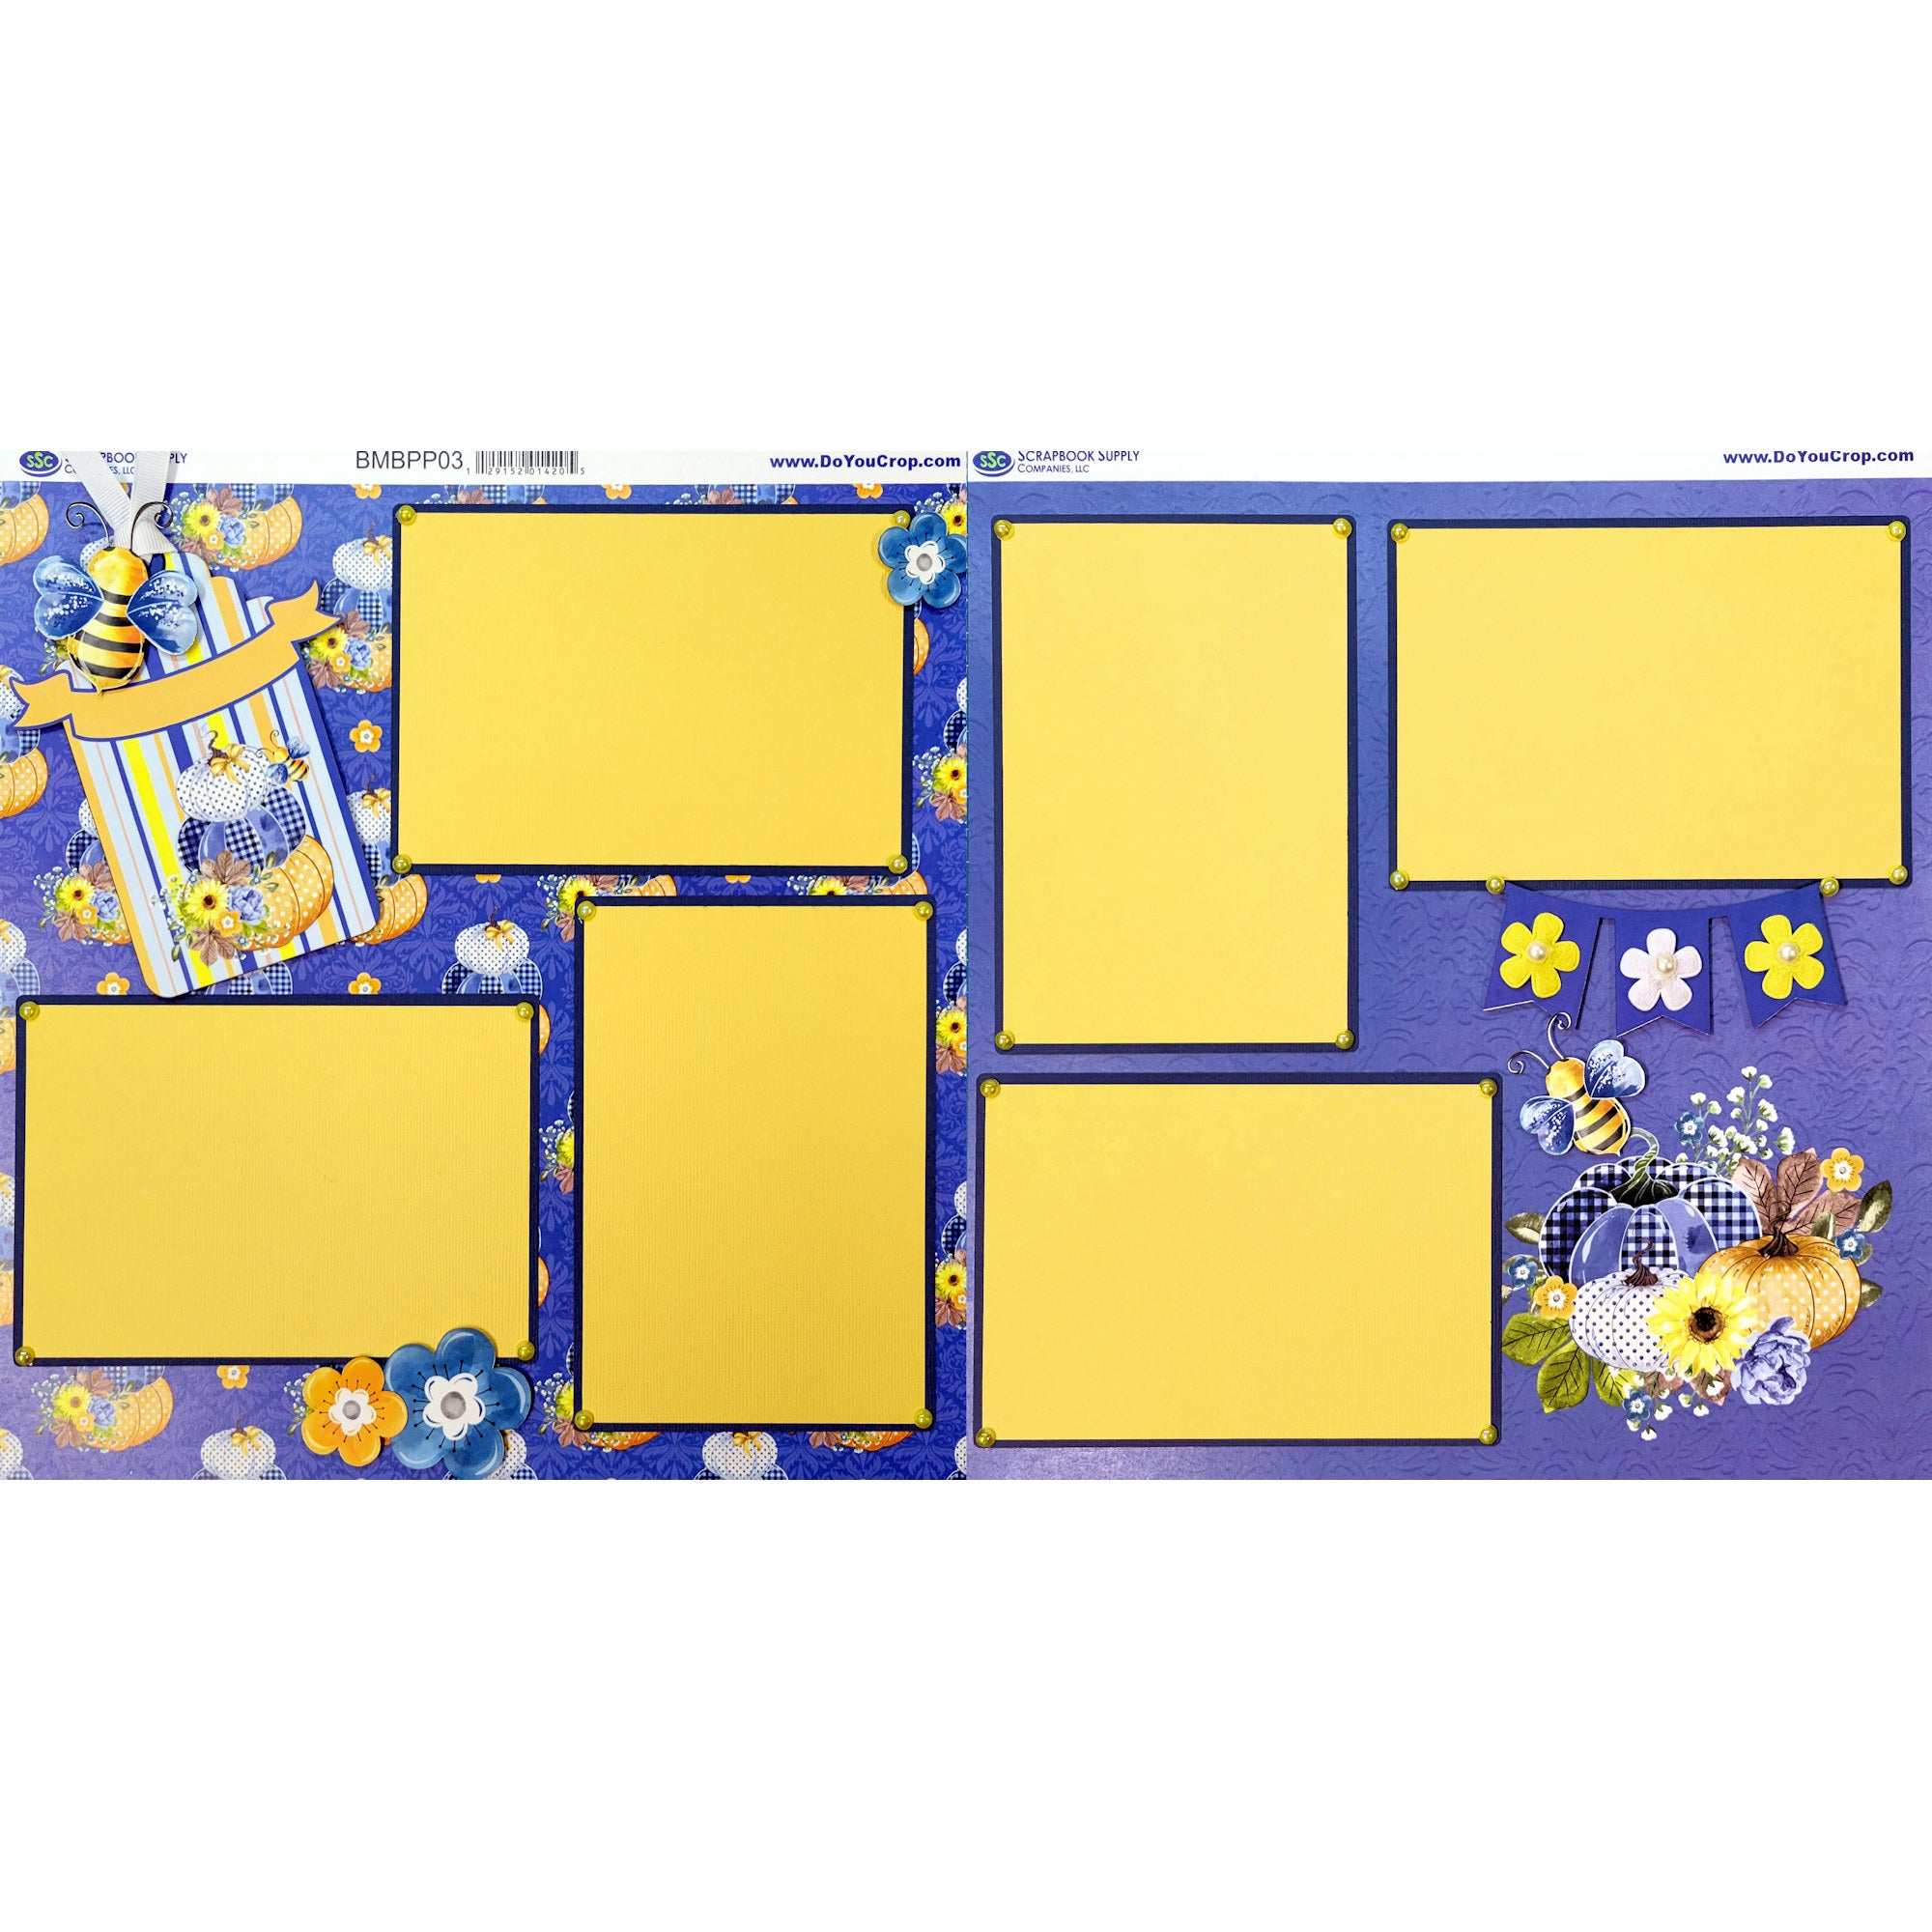 Bumblebee Fall (2) - 12 x 12 Pages, Fully-Assembled & Hand-Crafted 3D Scrapbook Premade by SSC Designs